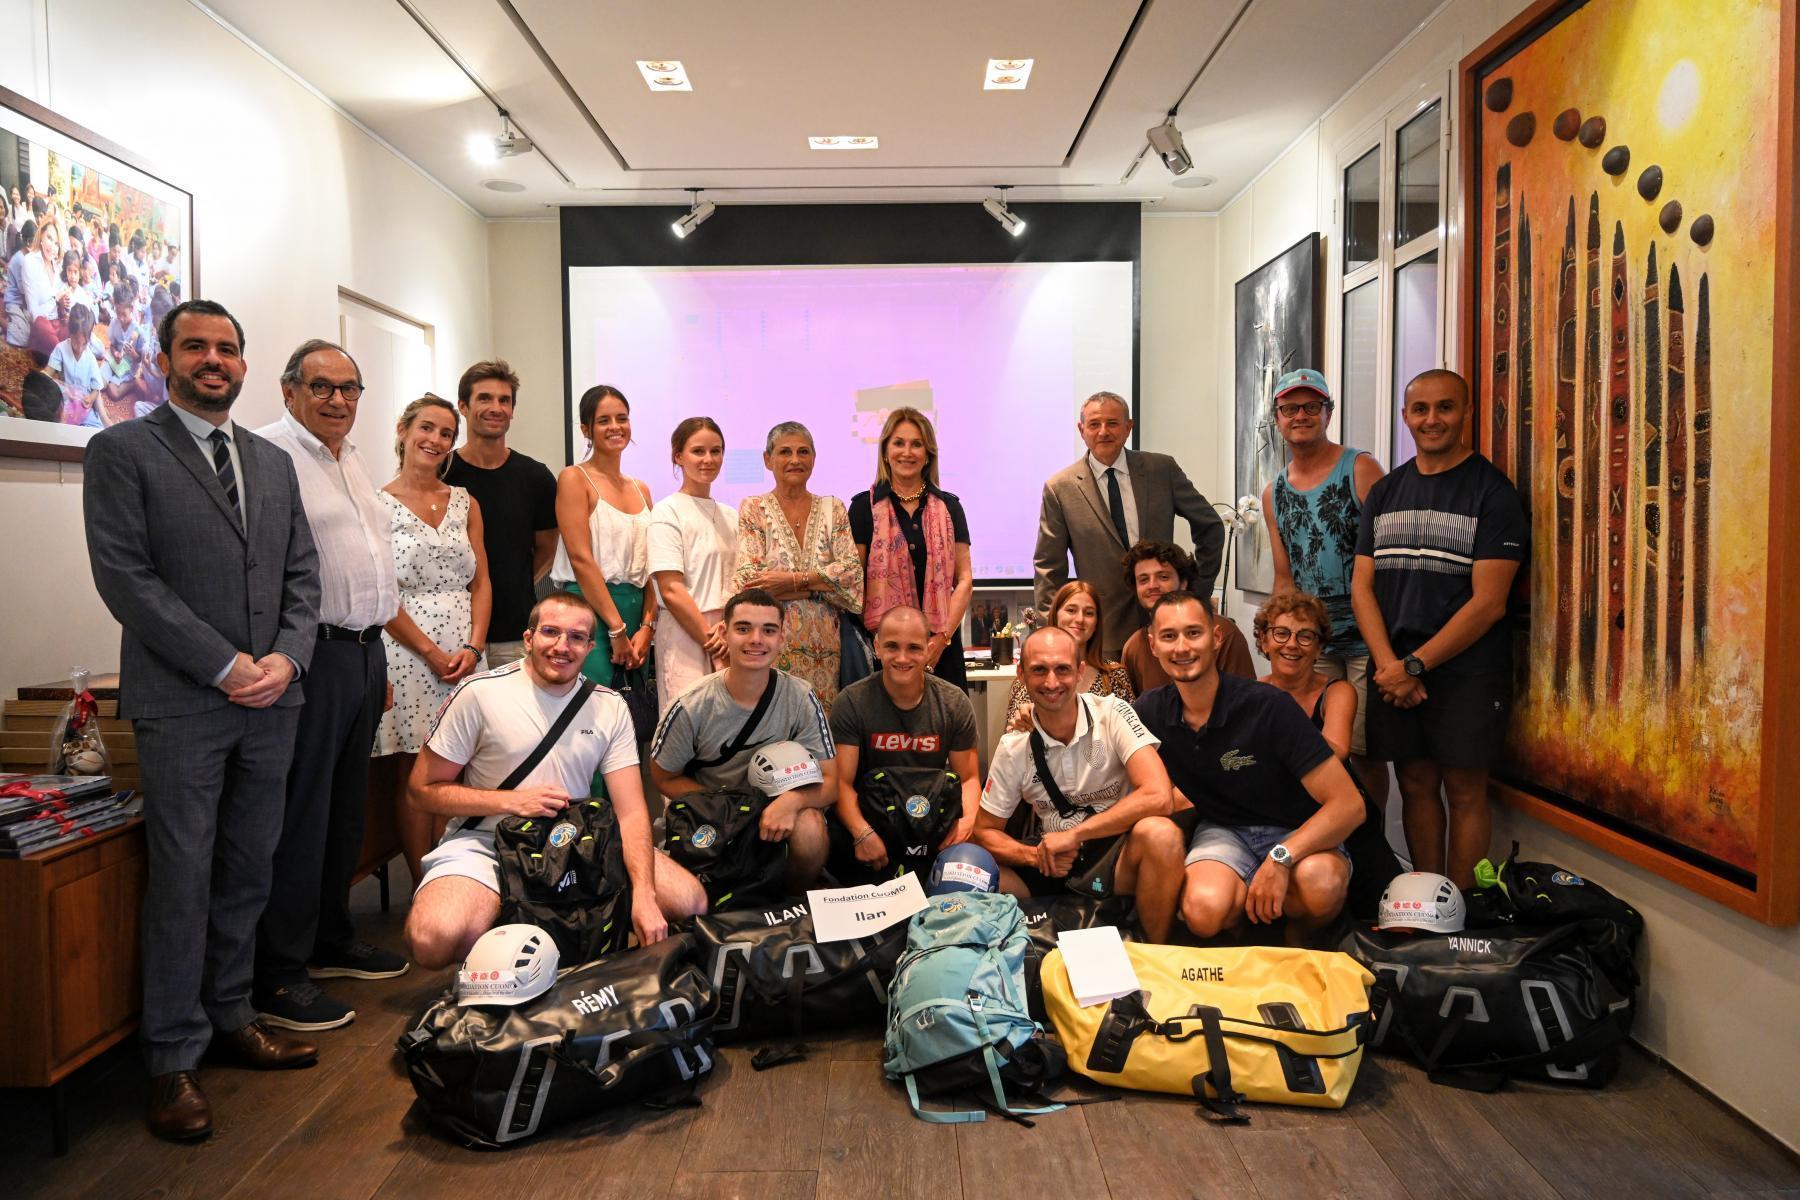  ‘Exploits sans Frontière’ accepts essential donations at reception held at Cuomo Foundation headquarters on June 27